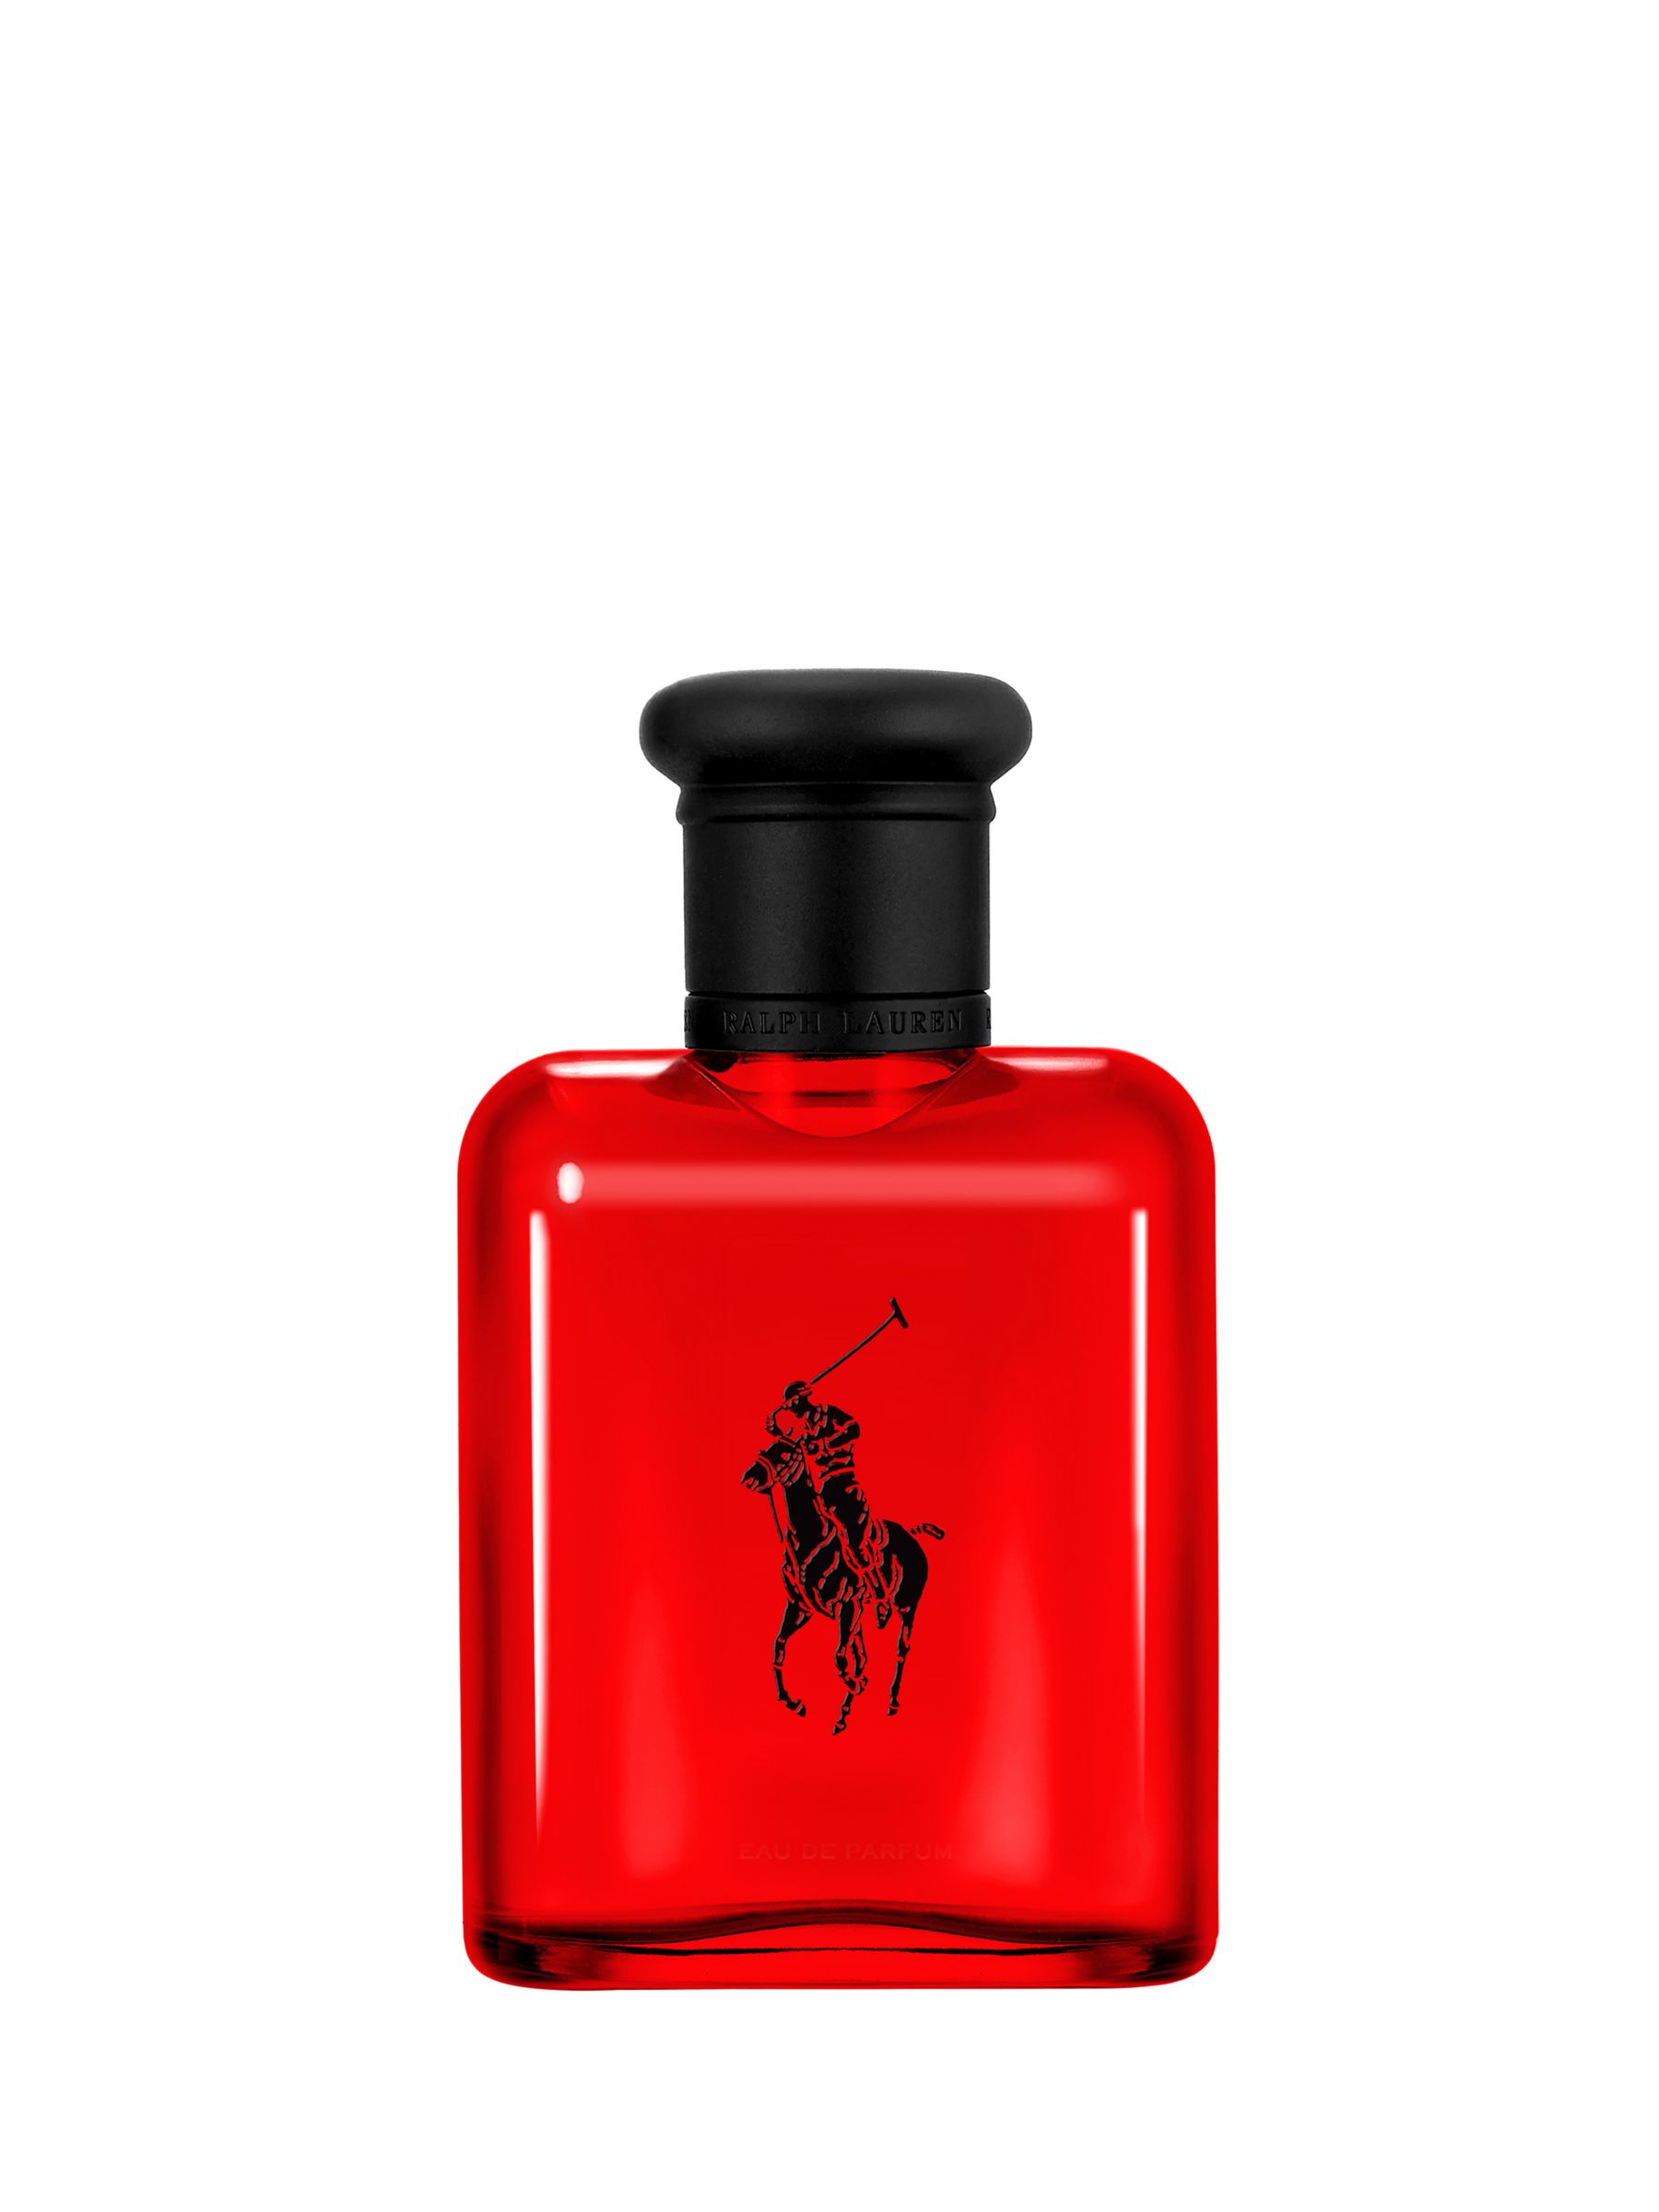 Shopping the Best New Perfume Scent Collections: Ralph Lauren